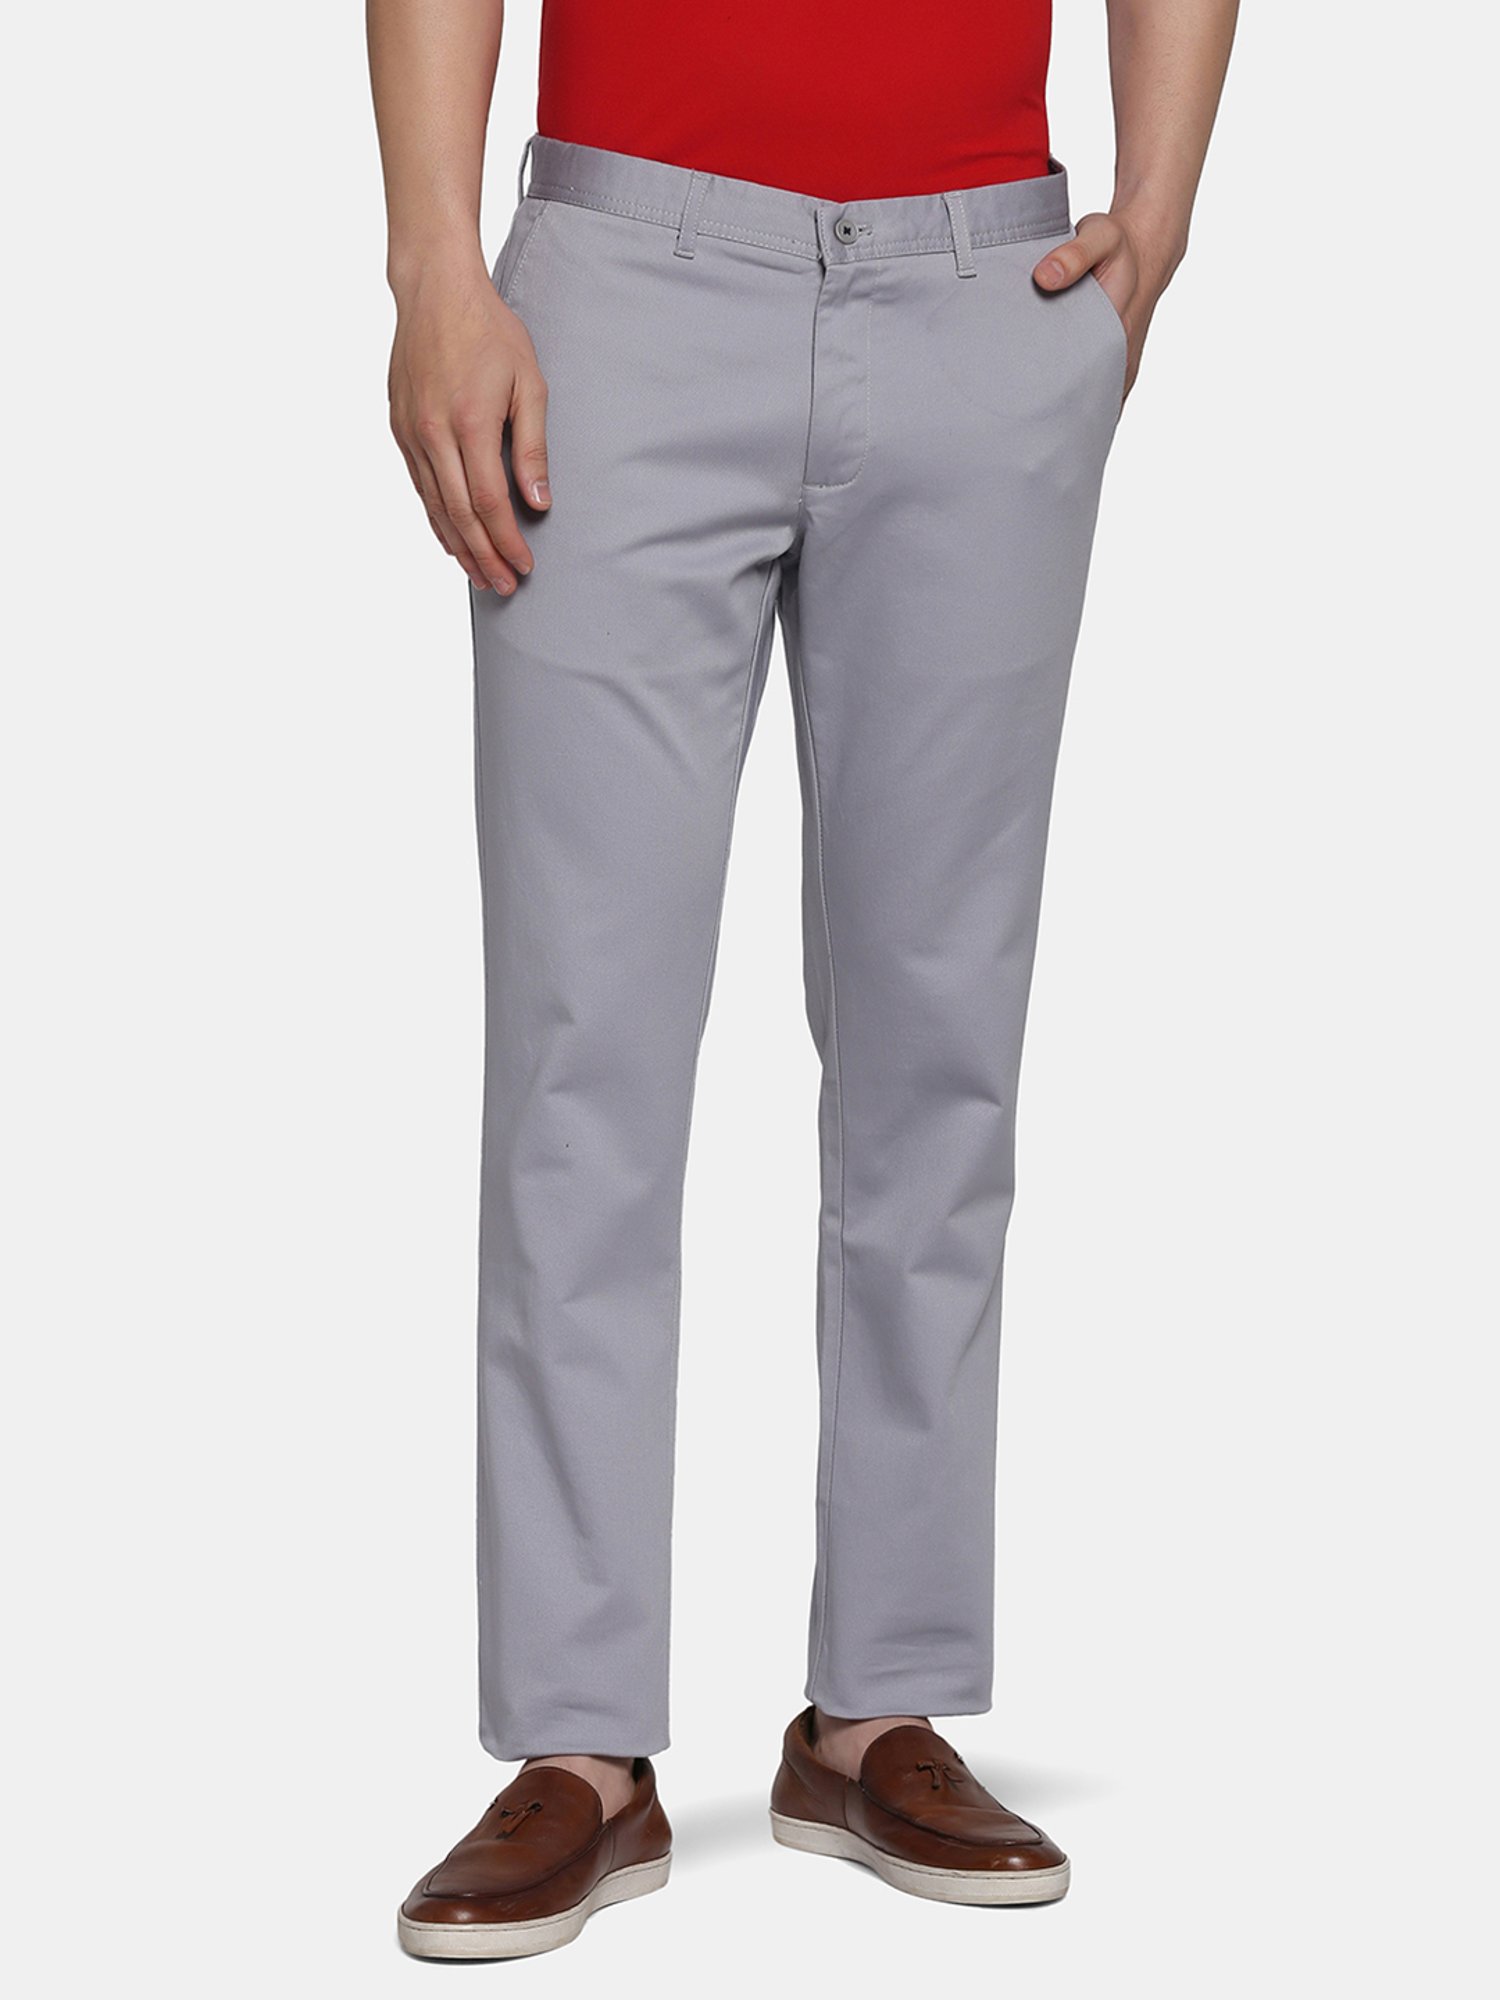 ASOS DESIGN wedding smart skinny trousers with micro texture in light grey   ASOS